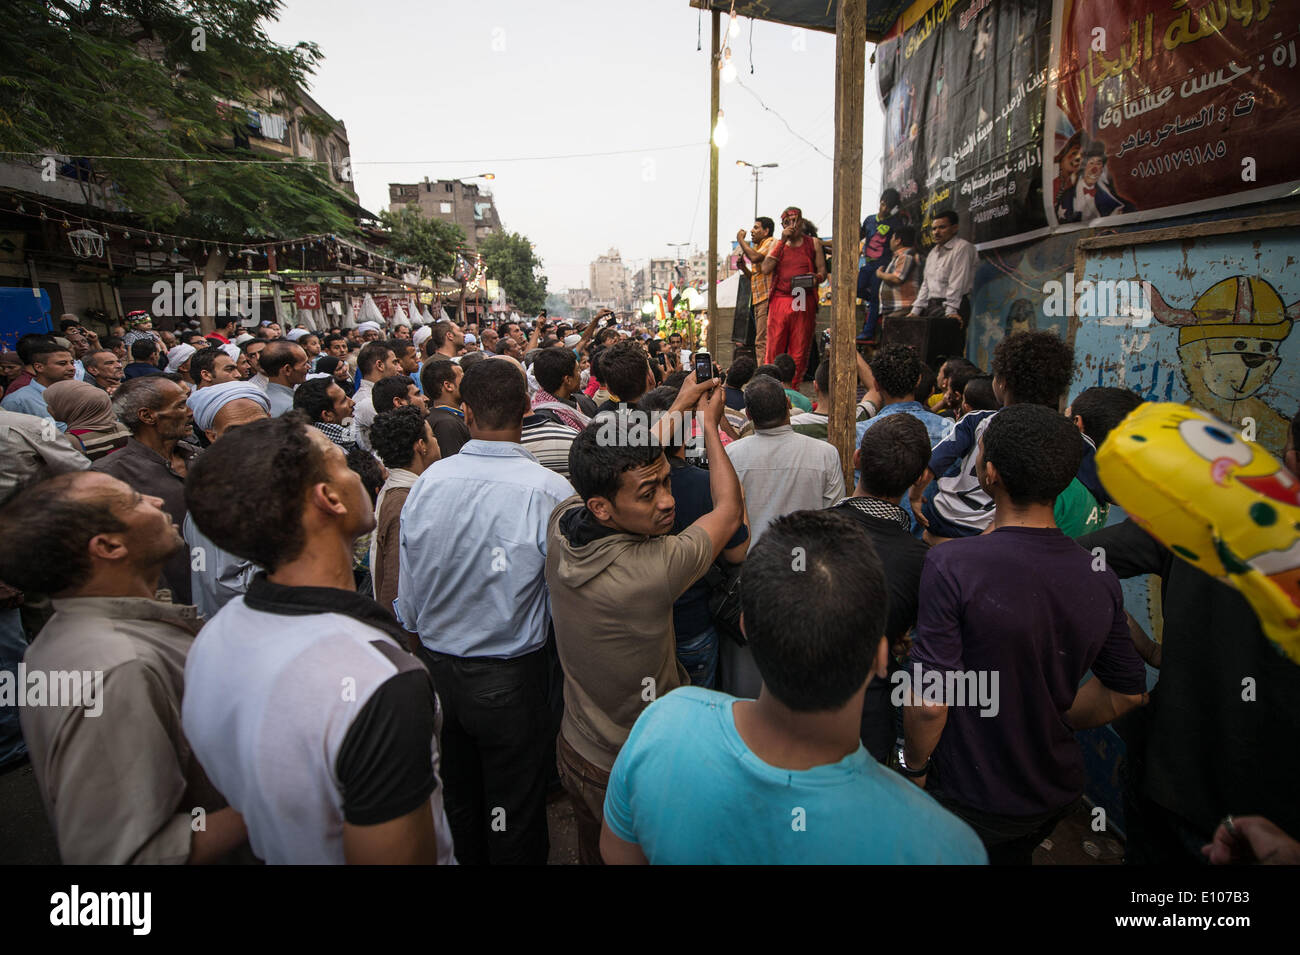 (140520) -- CAIRO, May 20, 2014 (Xinhua) -- Egyptians watch performance on the fair held near Sayeda Zeinab mosque for the celebration of 'Moulid Sayeda Zeinab' festival, or the birthday of the granddaughter of Prophet Mohamed, in old Cairo, Egypt, May 20, 2014. (Xinhua/Pan Chaoyue) Stock Photo